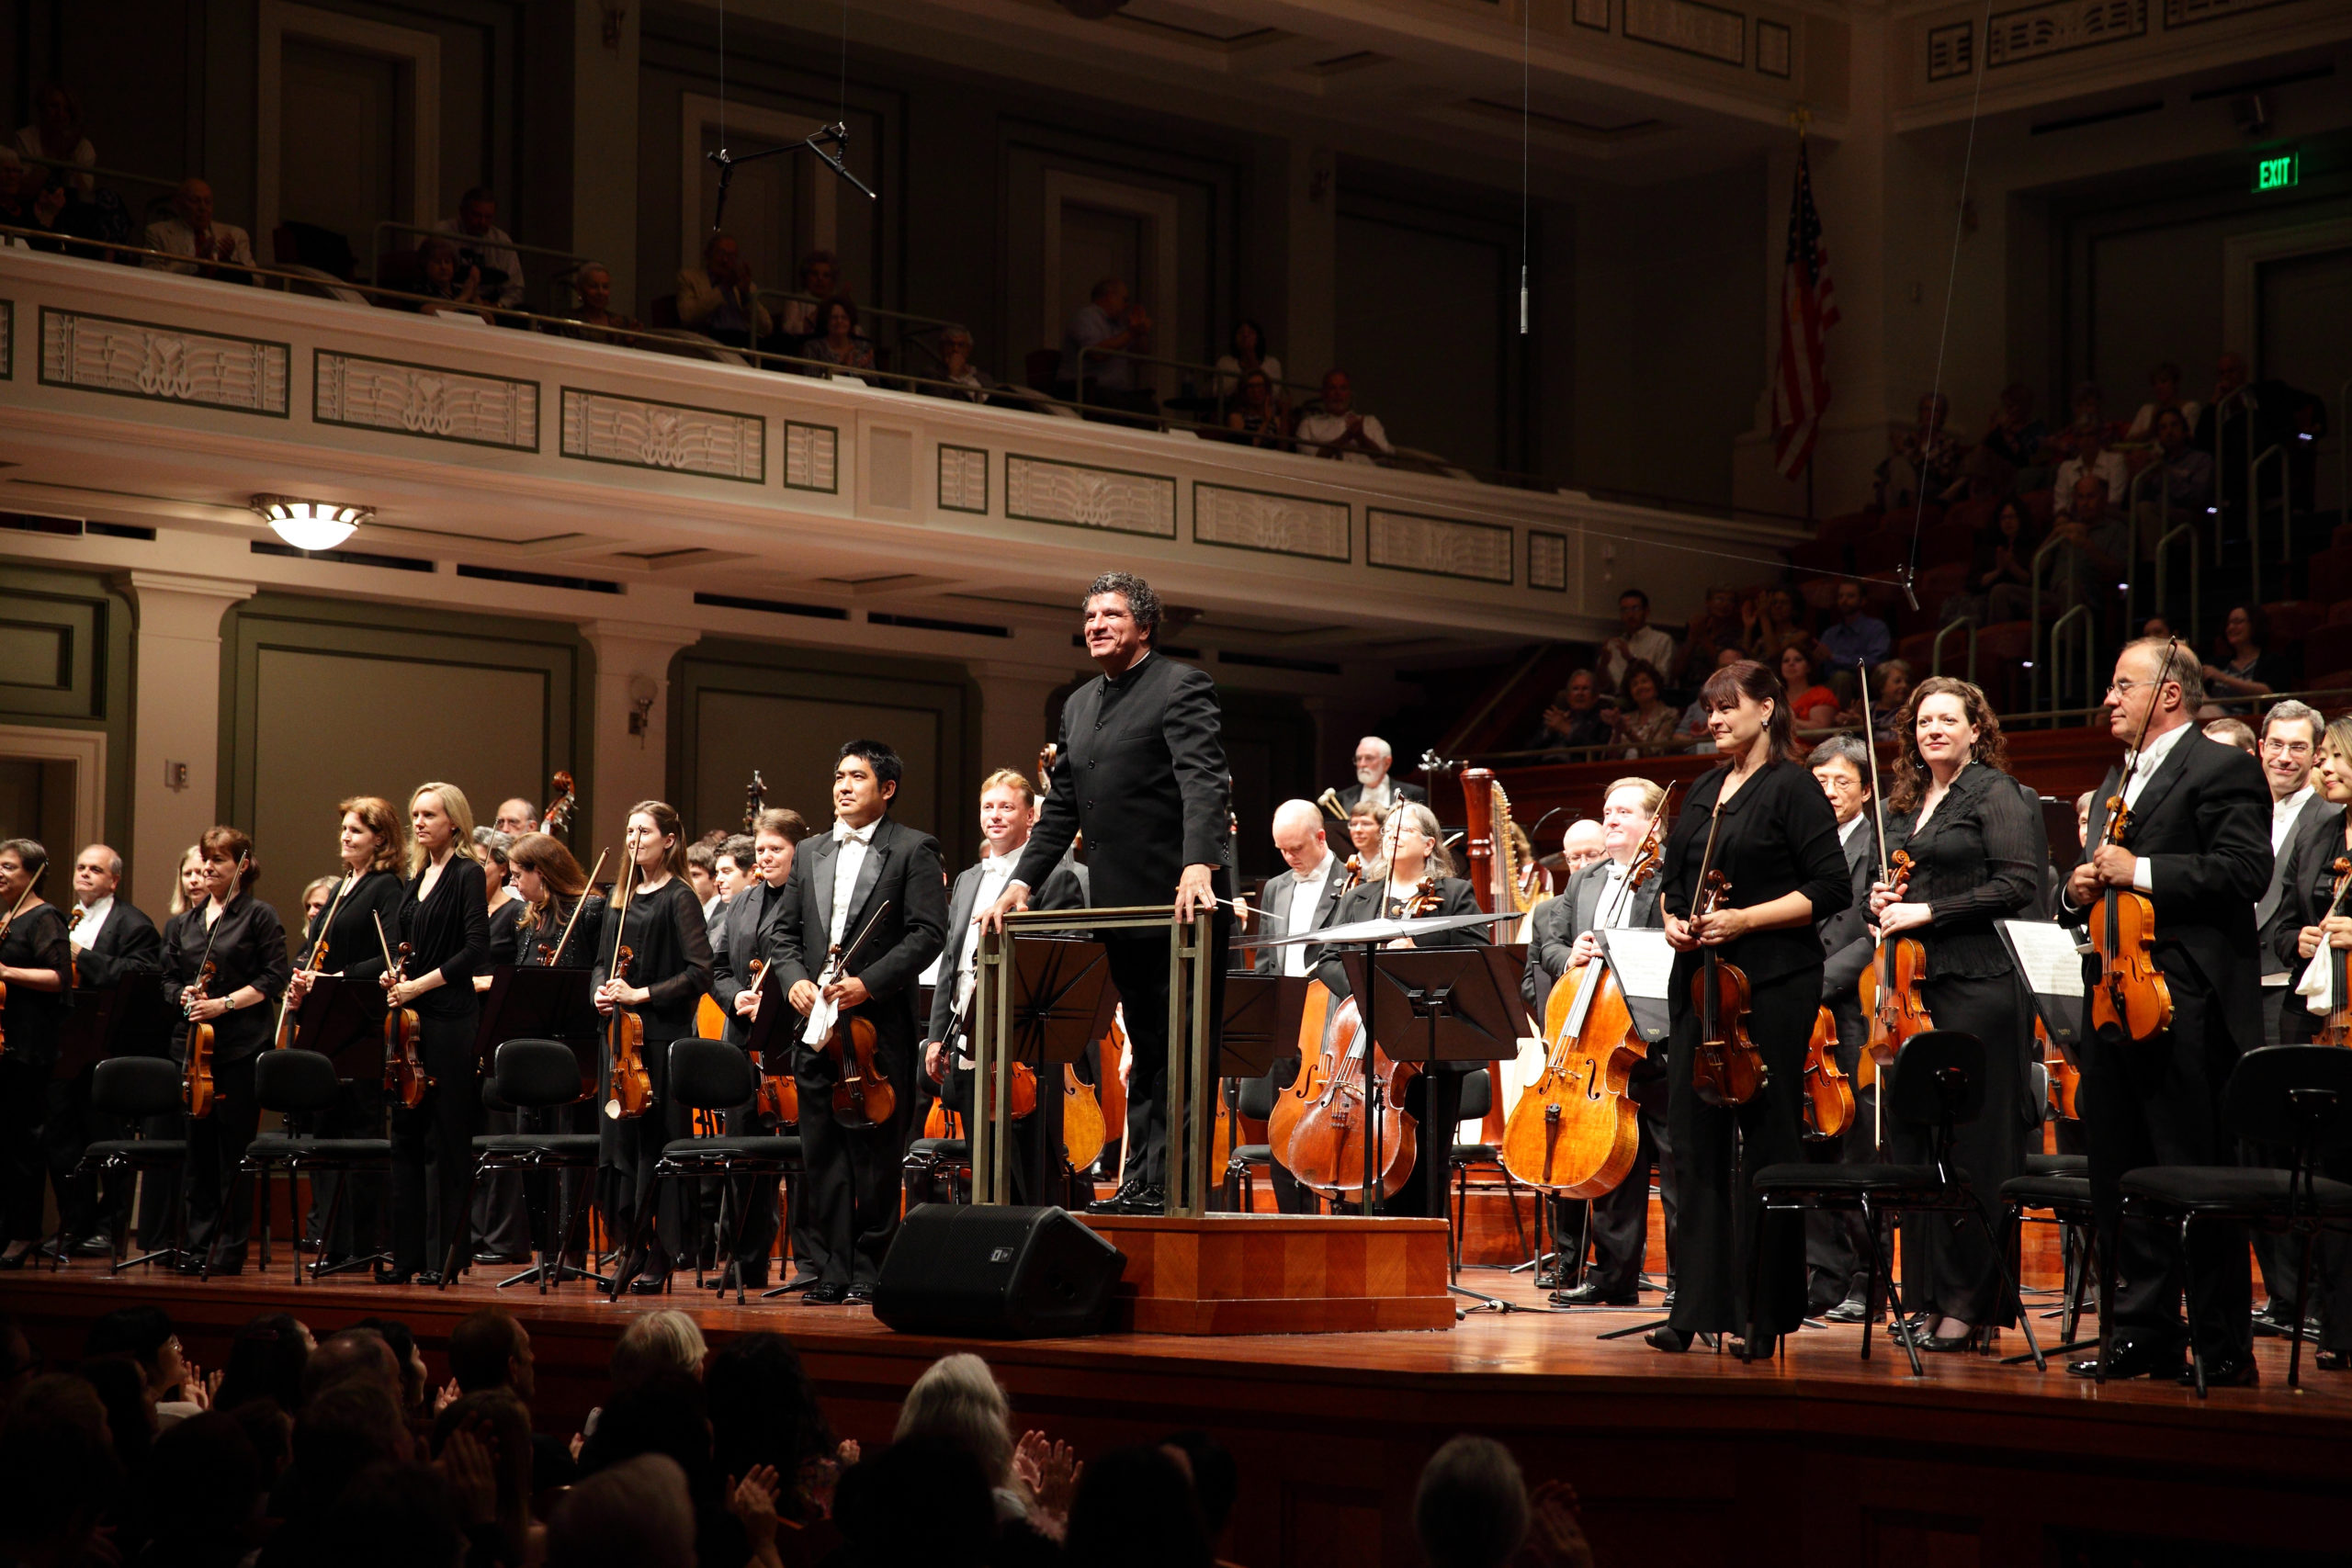 Nashville Symphony celebrates ‘an evening of firsts,’ with two world